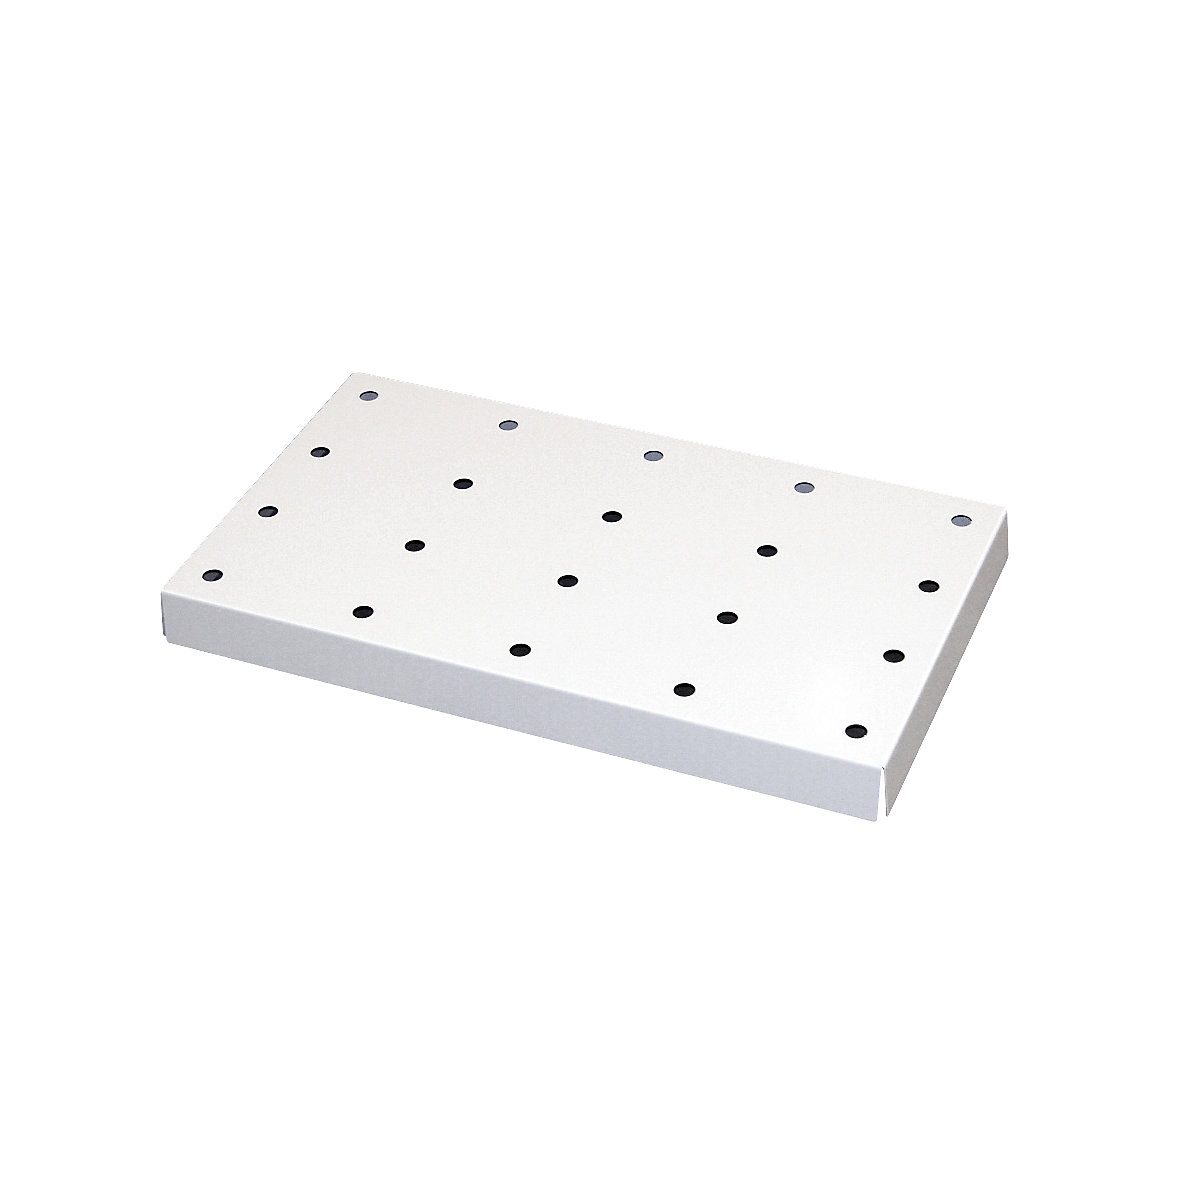 Perforated steel insert - asecos